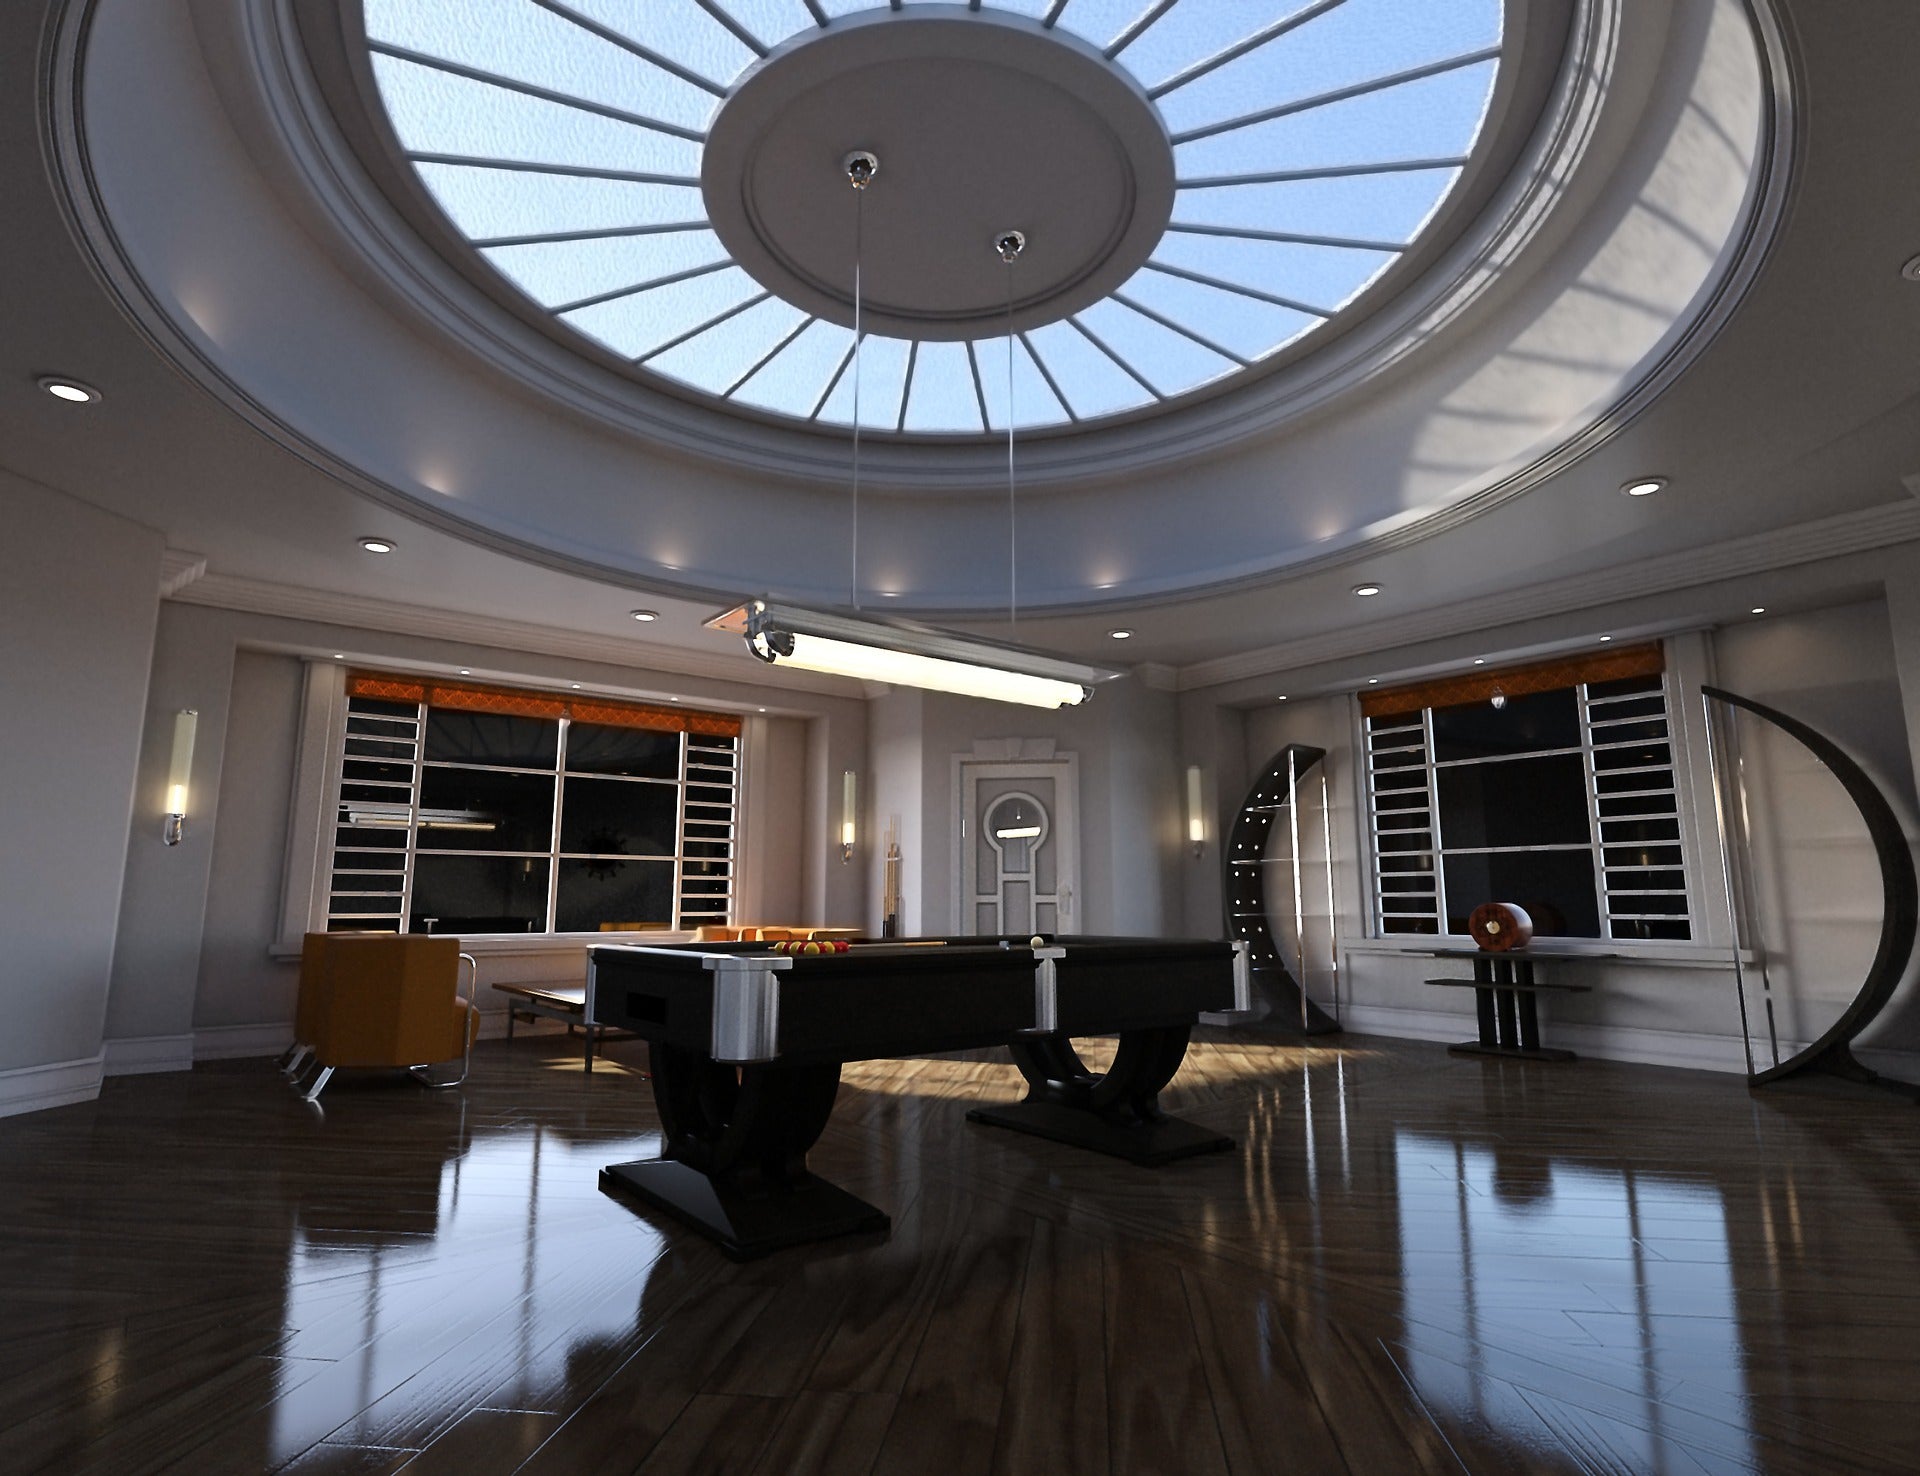 Benefits of Having a Skylight in Your Home or Business